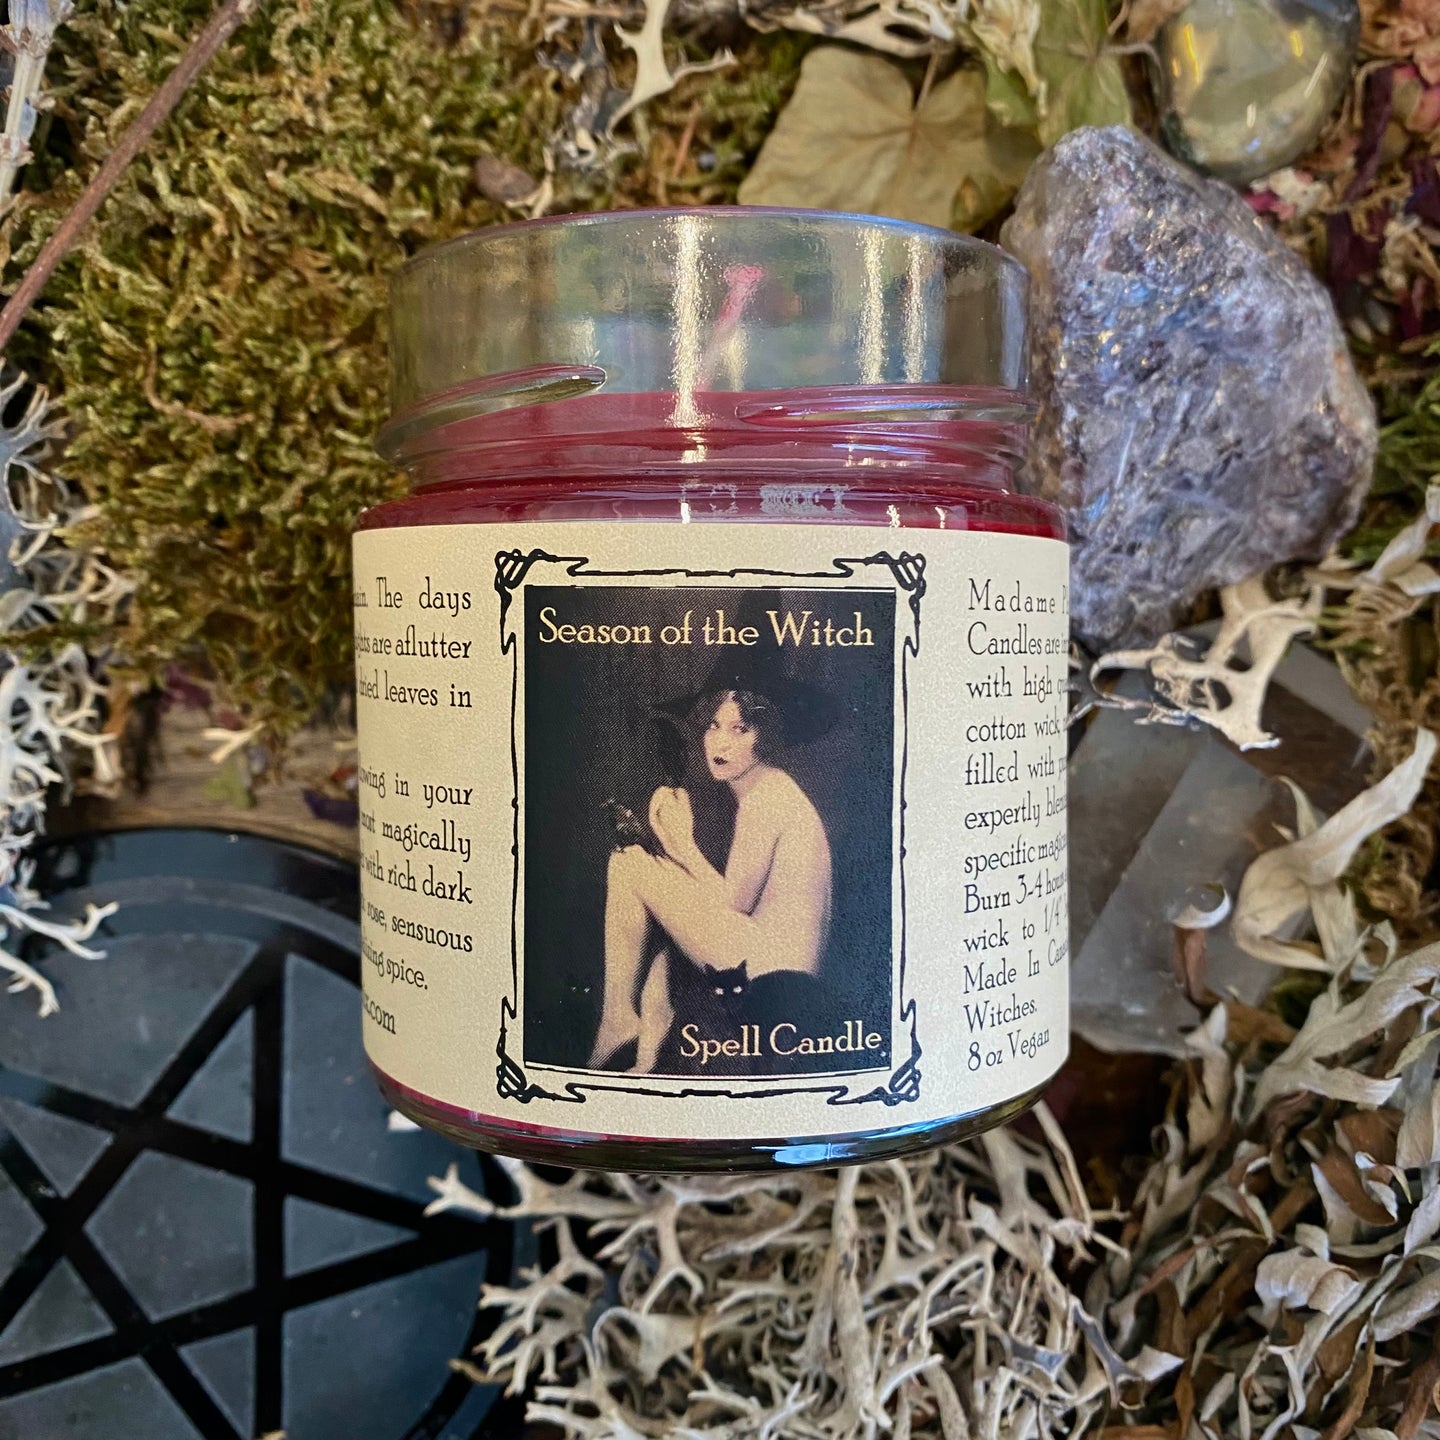 Season of the Witch Magic Samhain Spell Candle